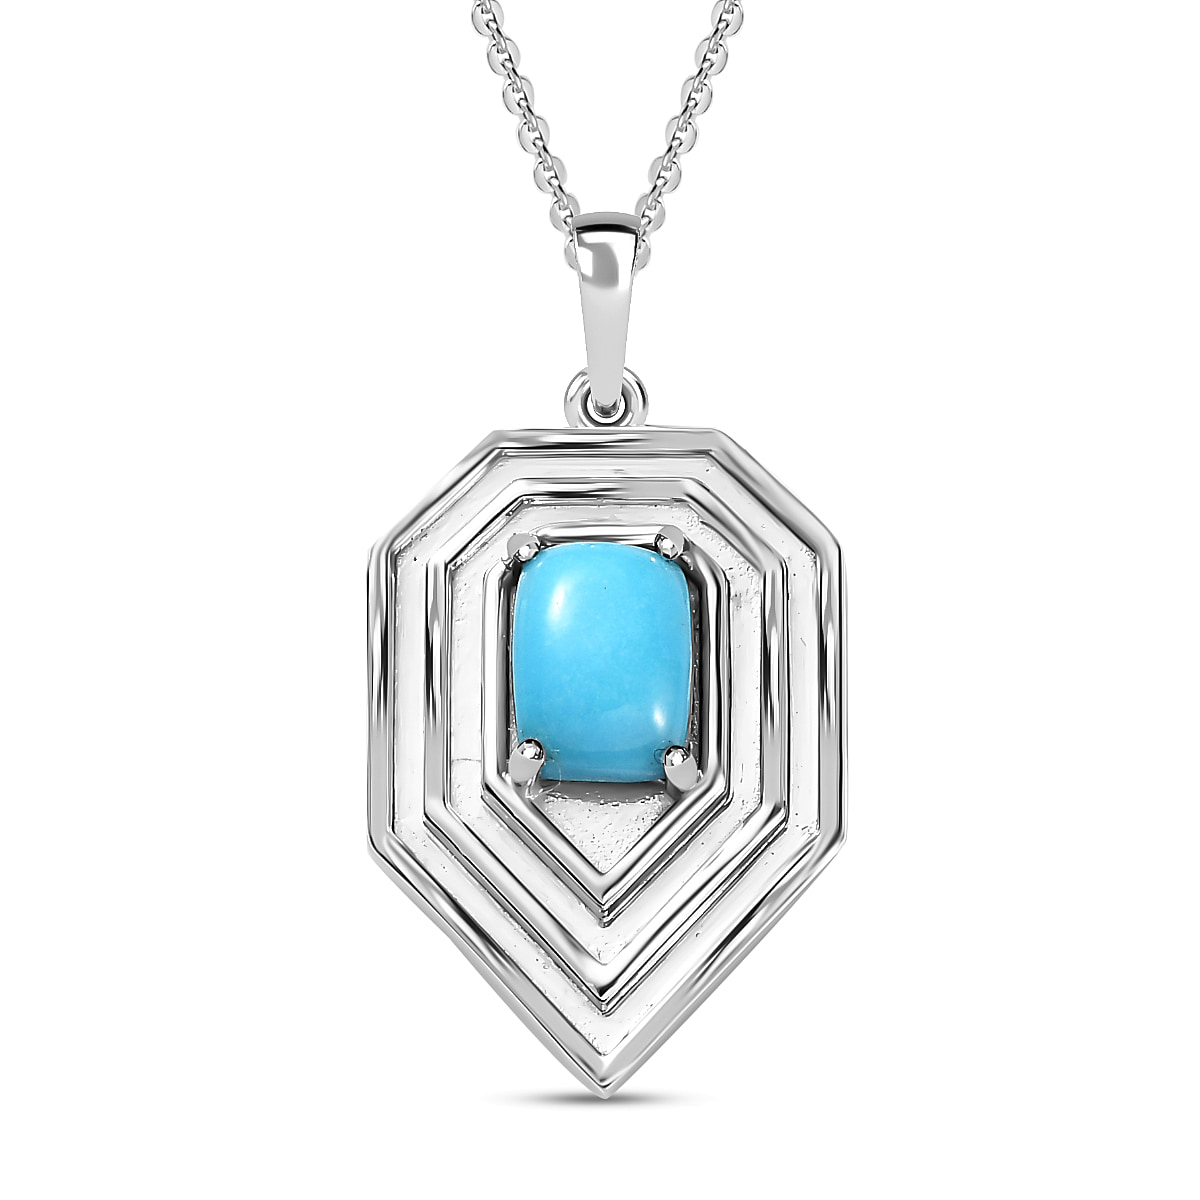 Arizona leeping Beauty Turquoise Pendant with Chain (Size 20) in Platinum Overlay Sterling SIlver 1.309 Ct, Silver  Wt. 6.00 GM